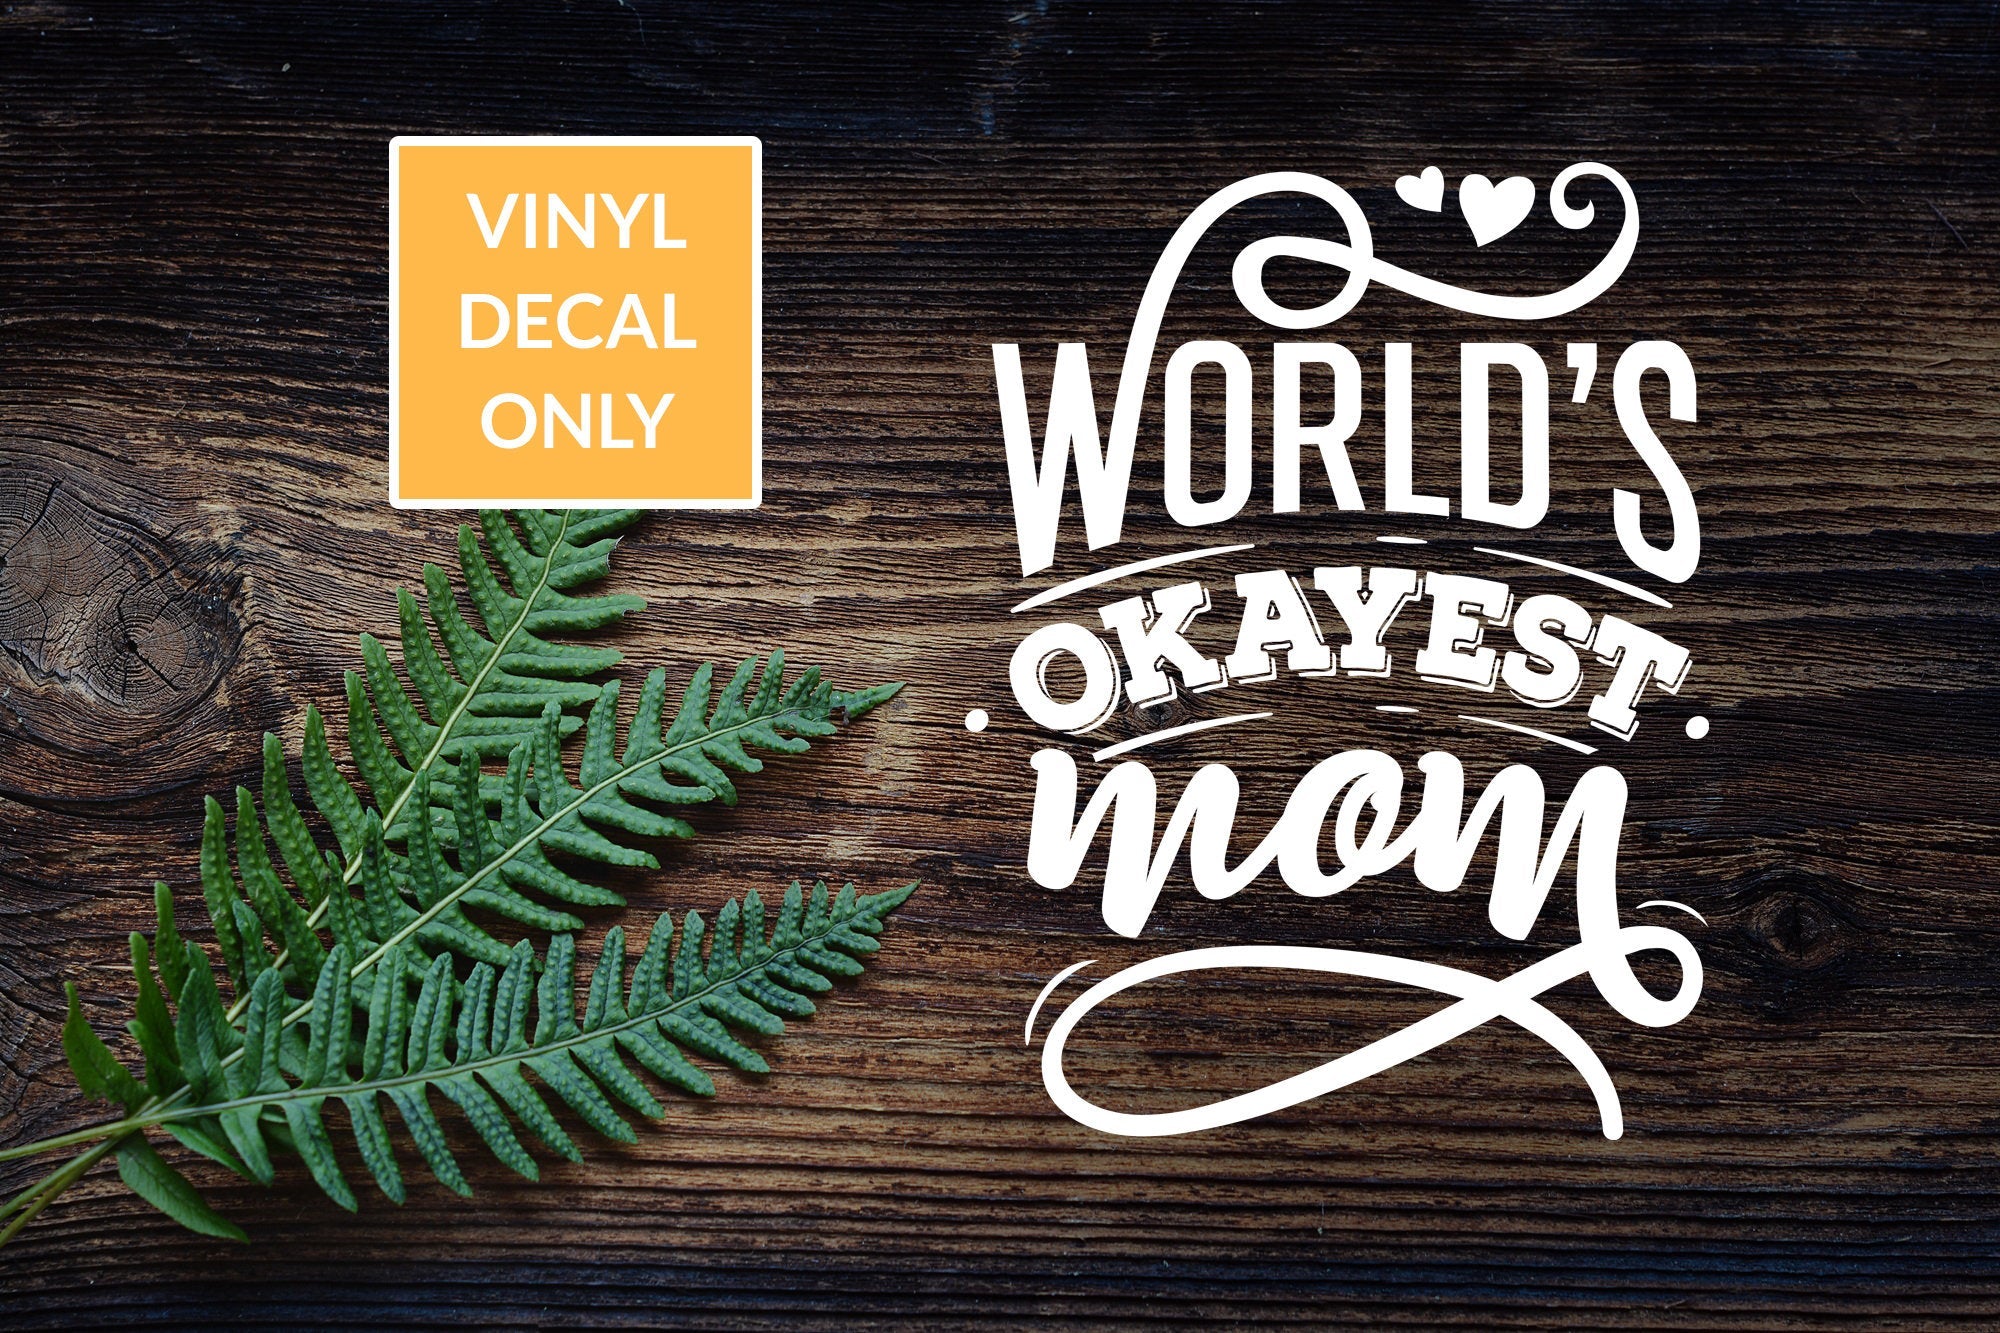 World's Okayest Mom Decal - Permanent Vinyl Sticker for Cars, Signs, Acrylic, Glass, Metal, Wood, Decor, Smooth Surfaces, Mother's Day Gift